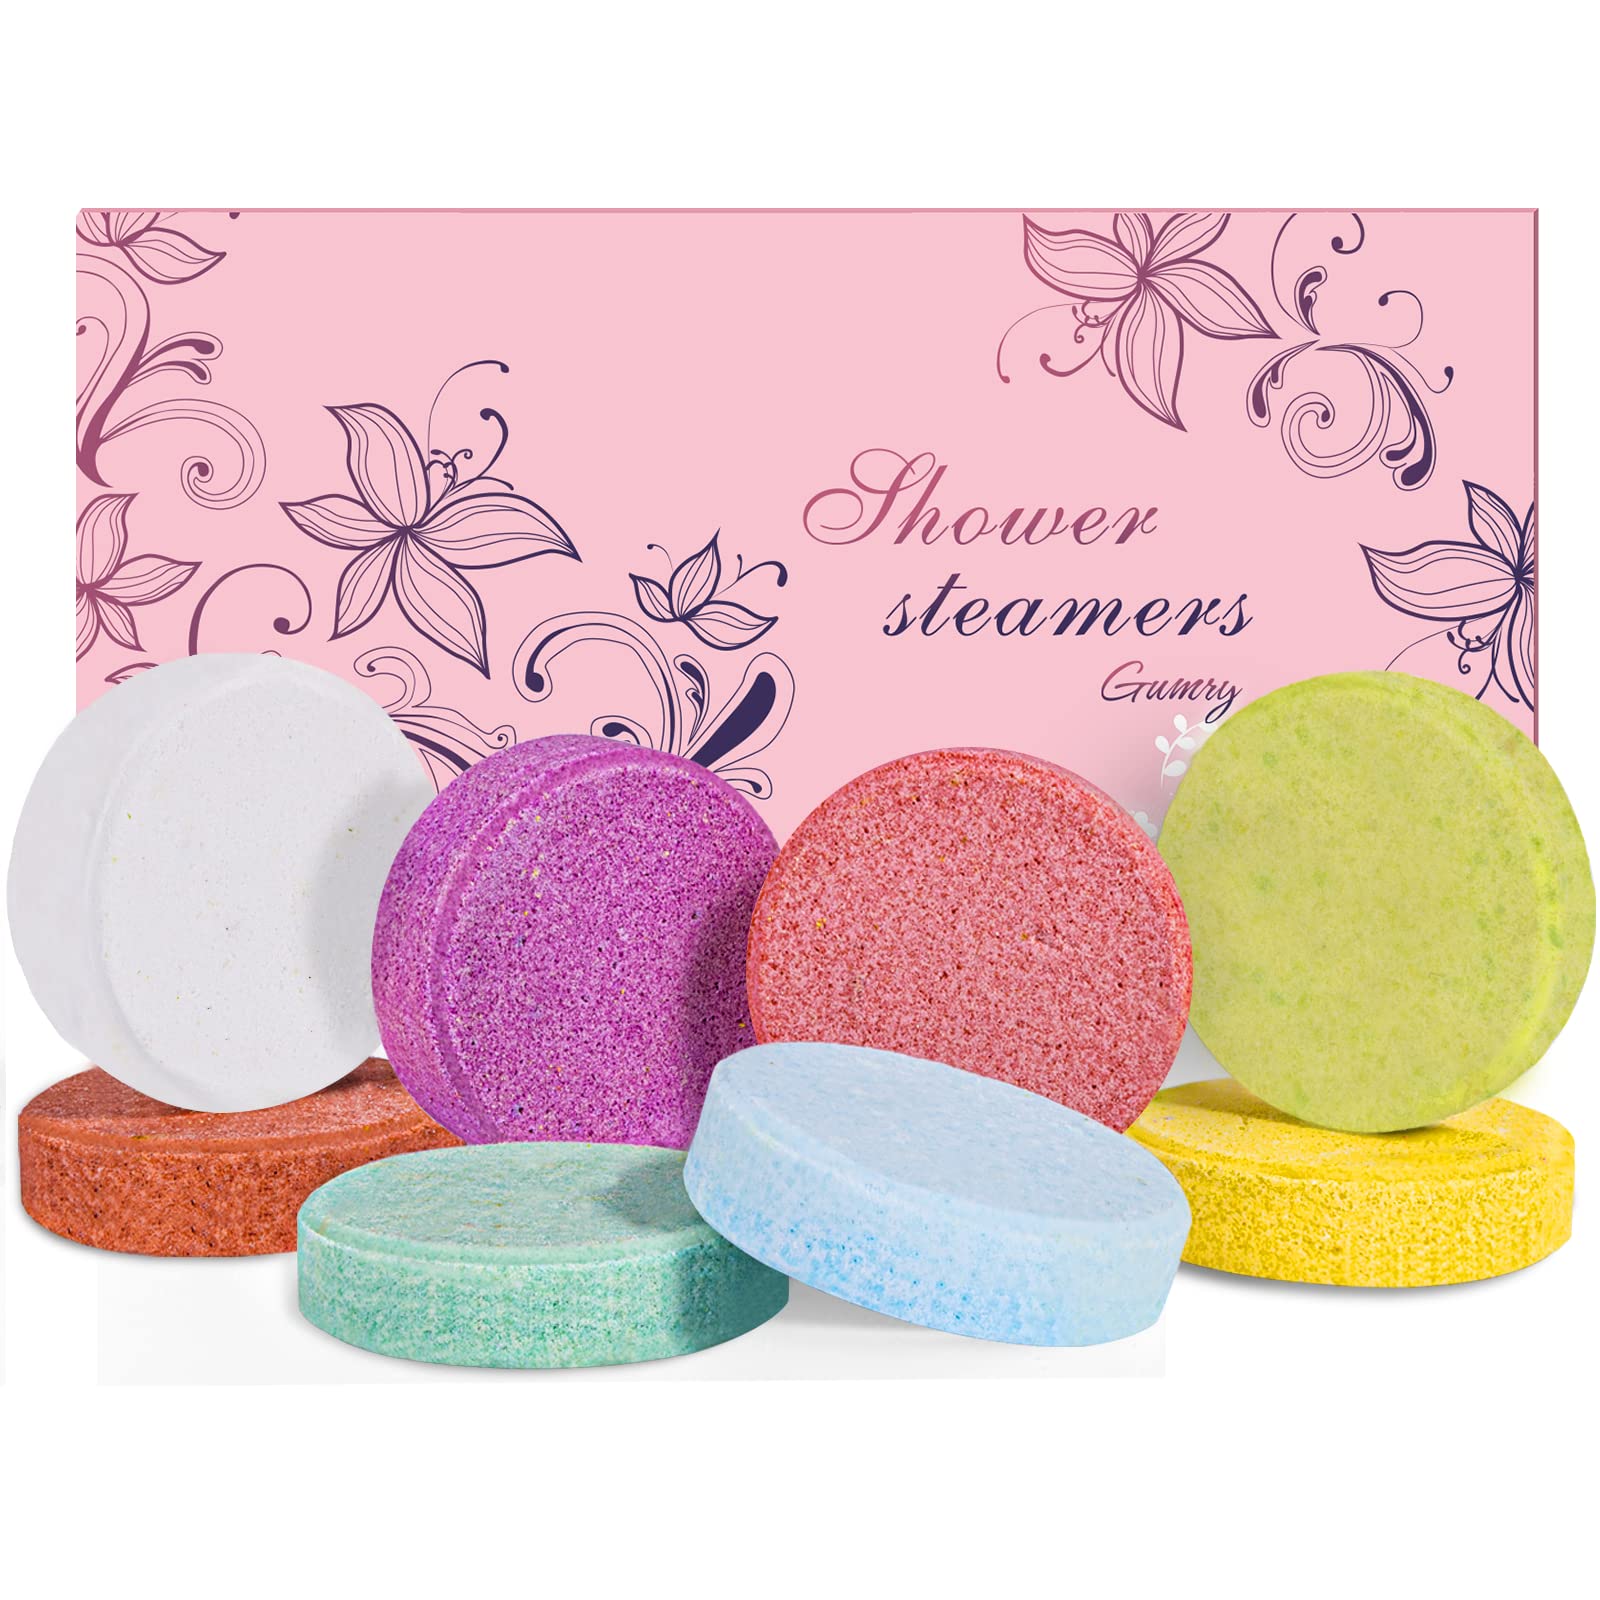 Shower Steamers Aromatherapy 8 Pack Bath Bombs Essential Oil Self Care Spa Kit Gifts for Her, Relaxation Birthday Gifts Basket Stuffers for Women Who Have Everything